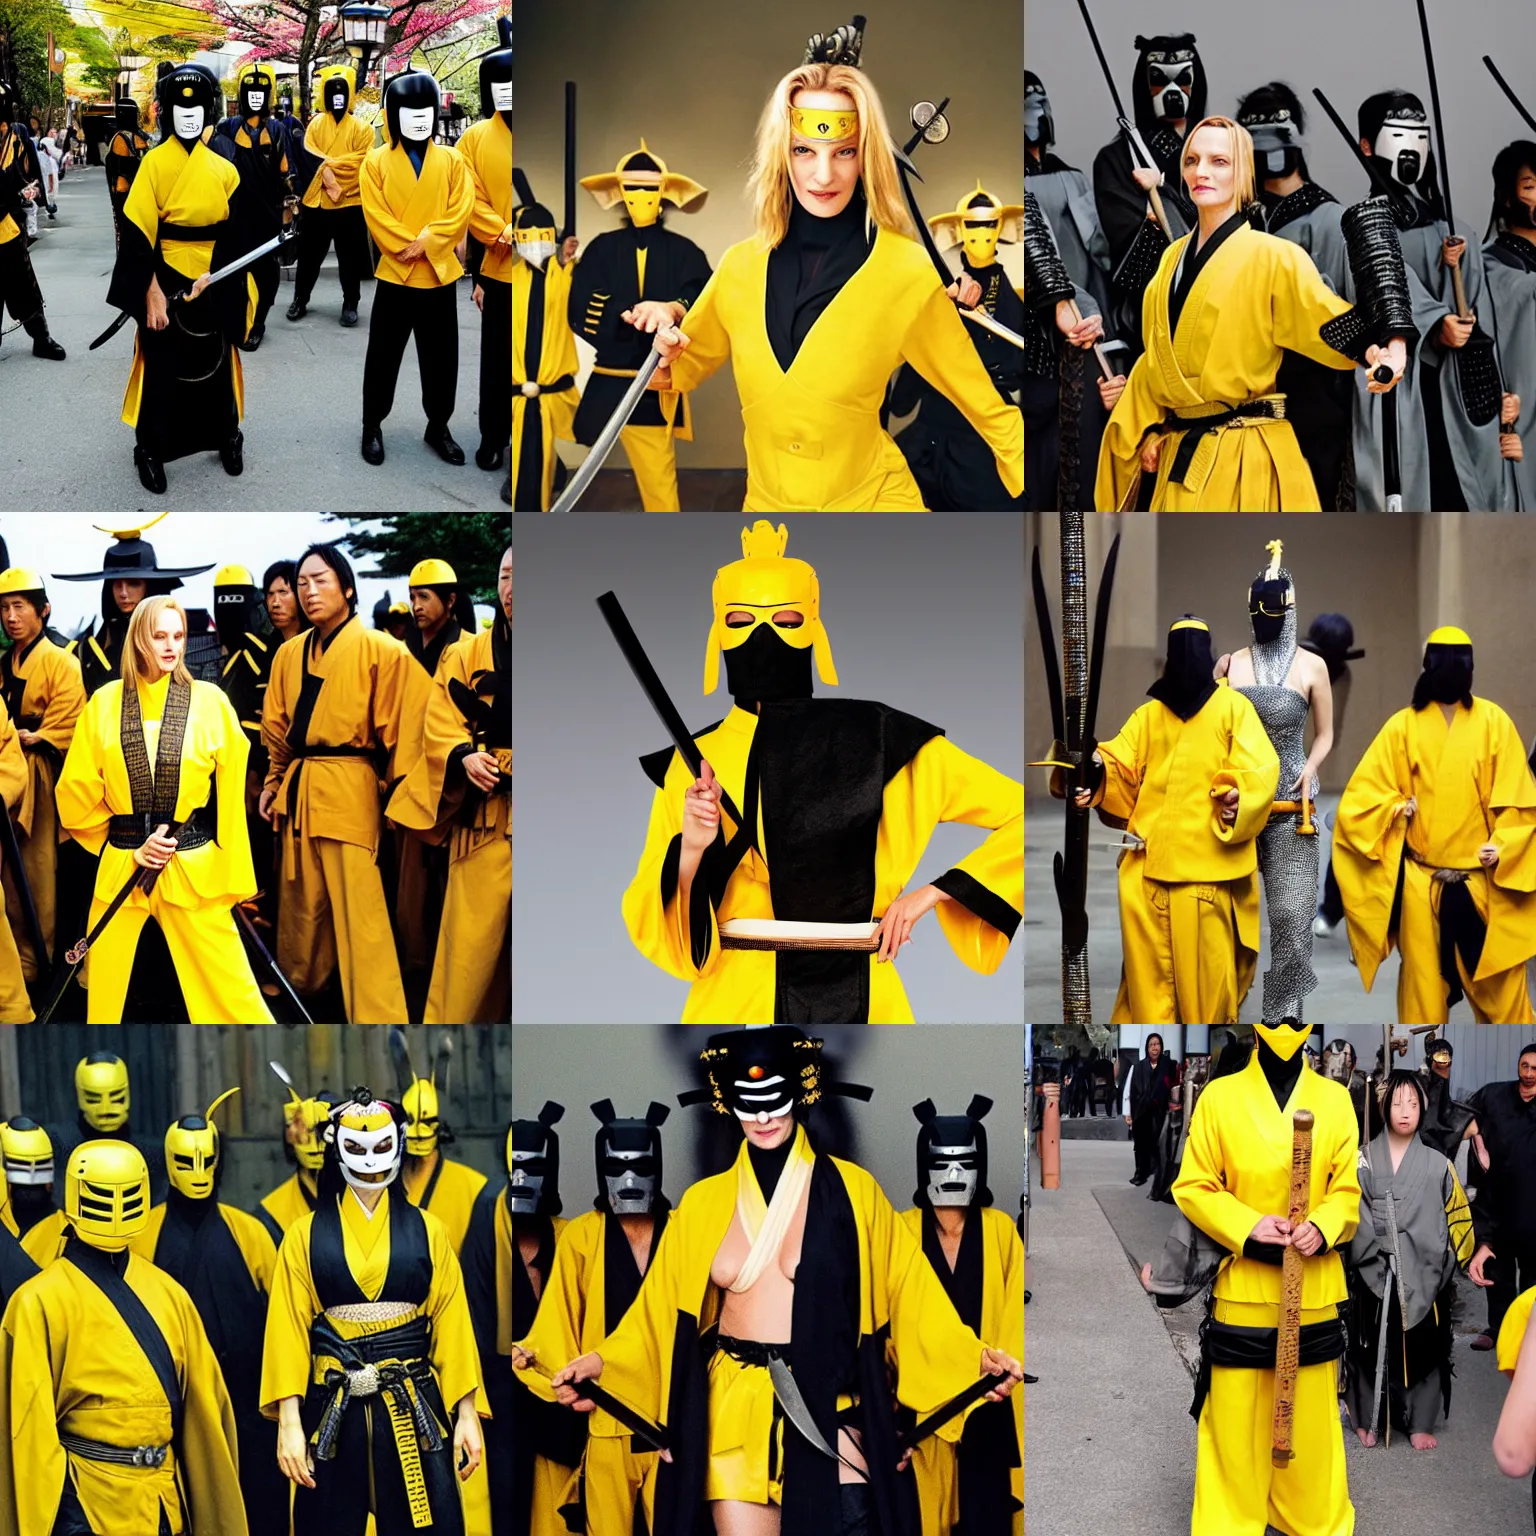 Prompt: uma thurman in a yellow motorcycle suit holding a samurai sword surrounded by japanese swordsmen wearing small black masquerade masks